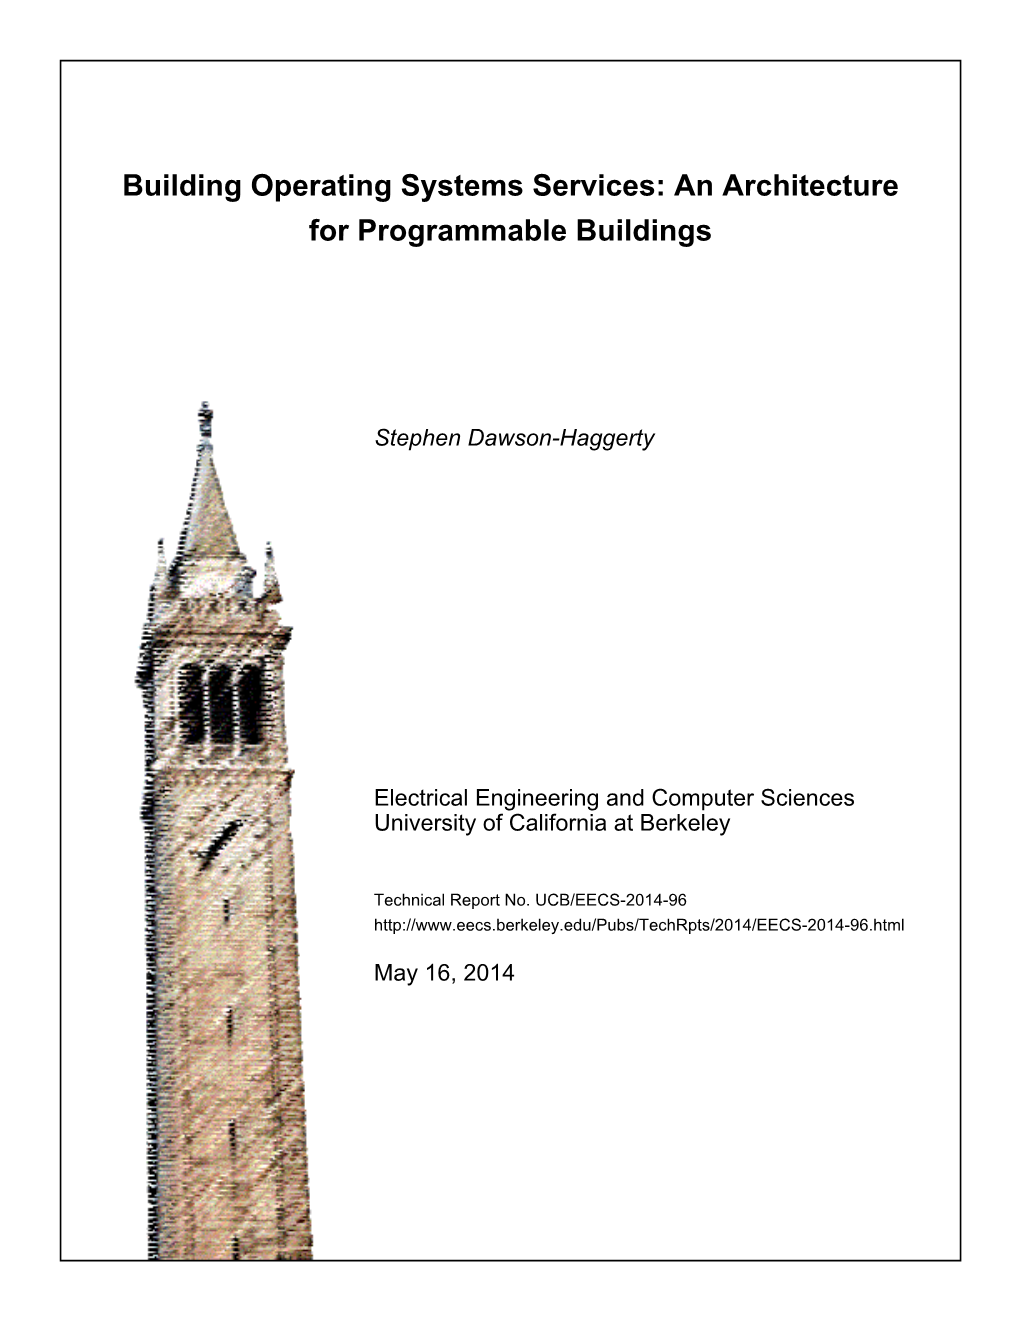 Building Operating Systems Services: an Architecture for Programmable Buildings